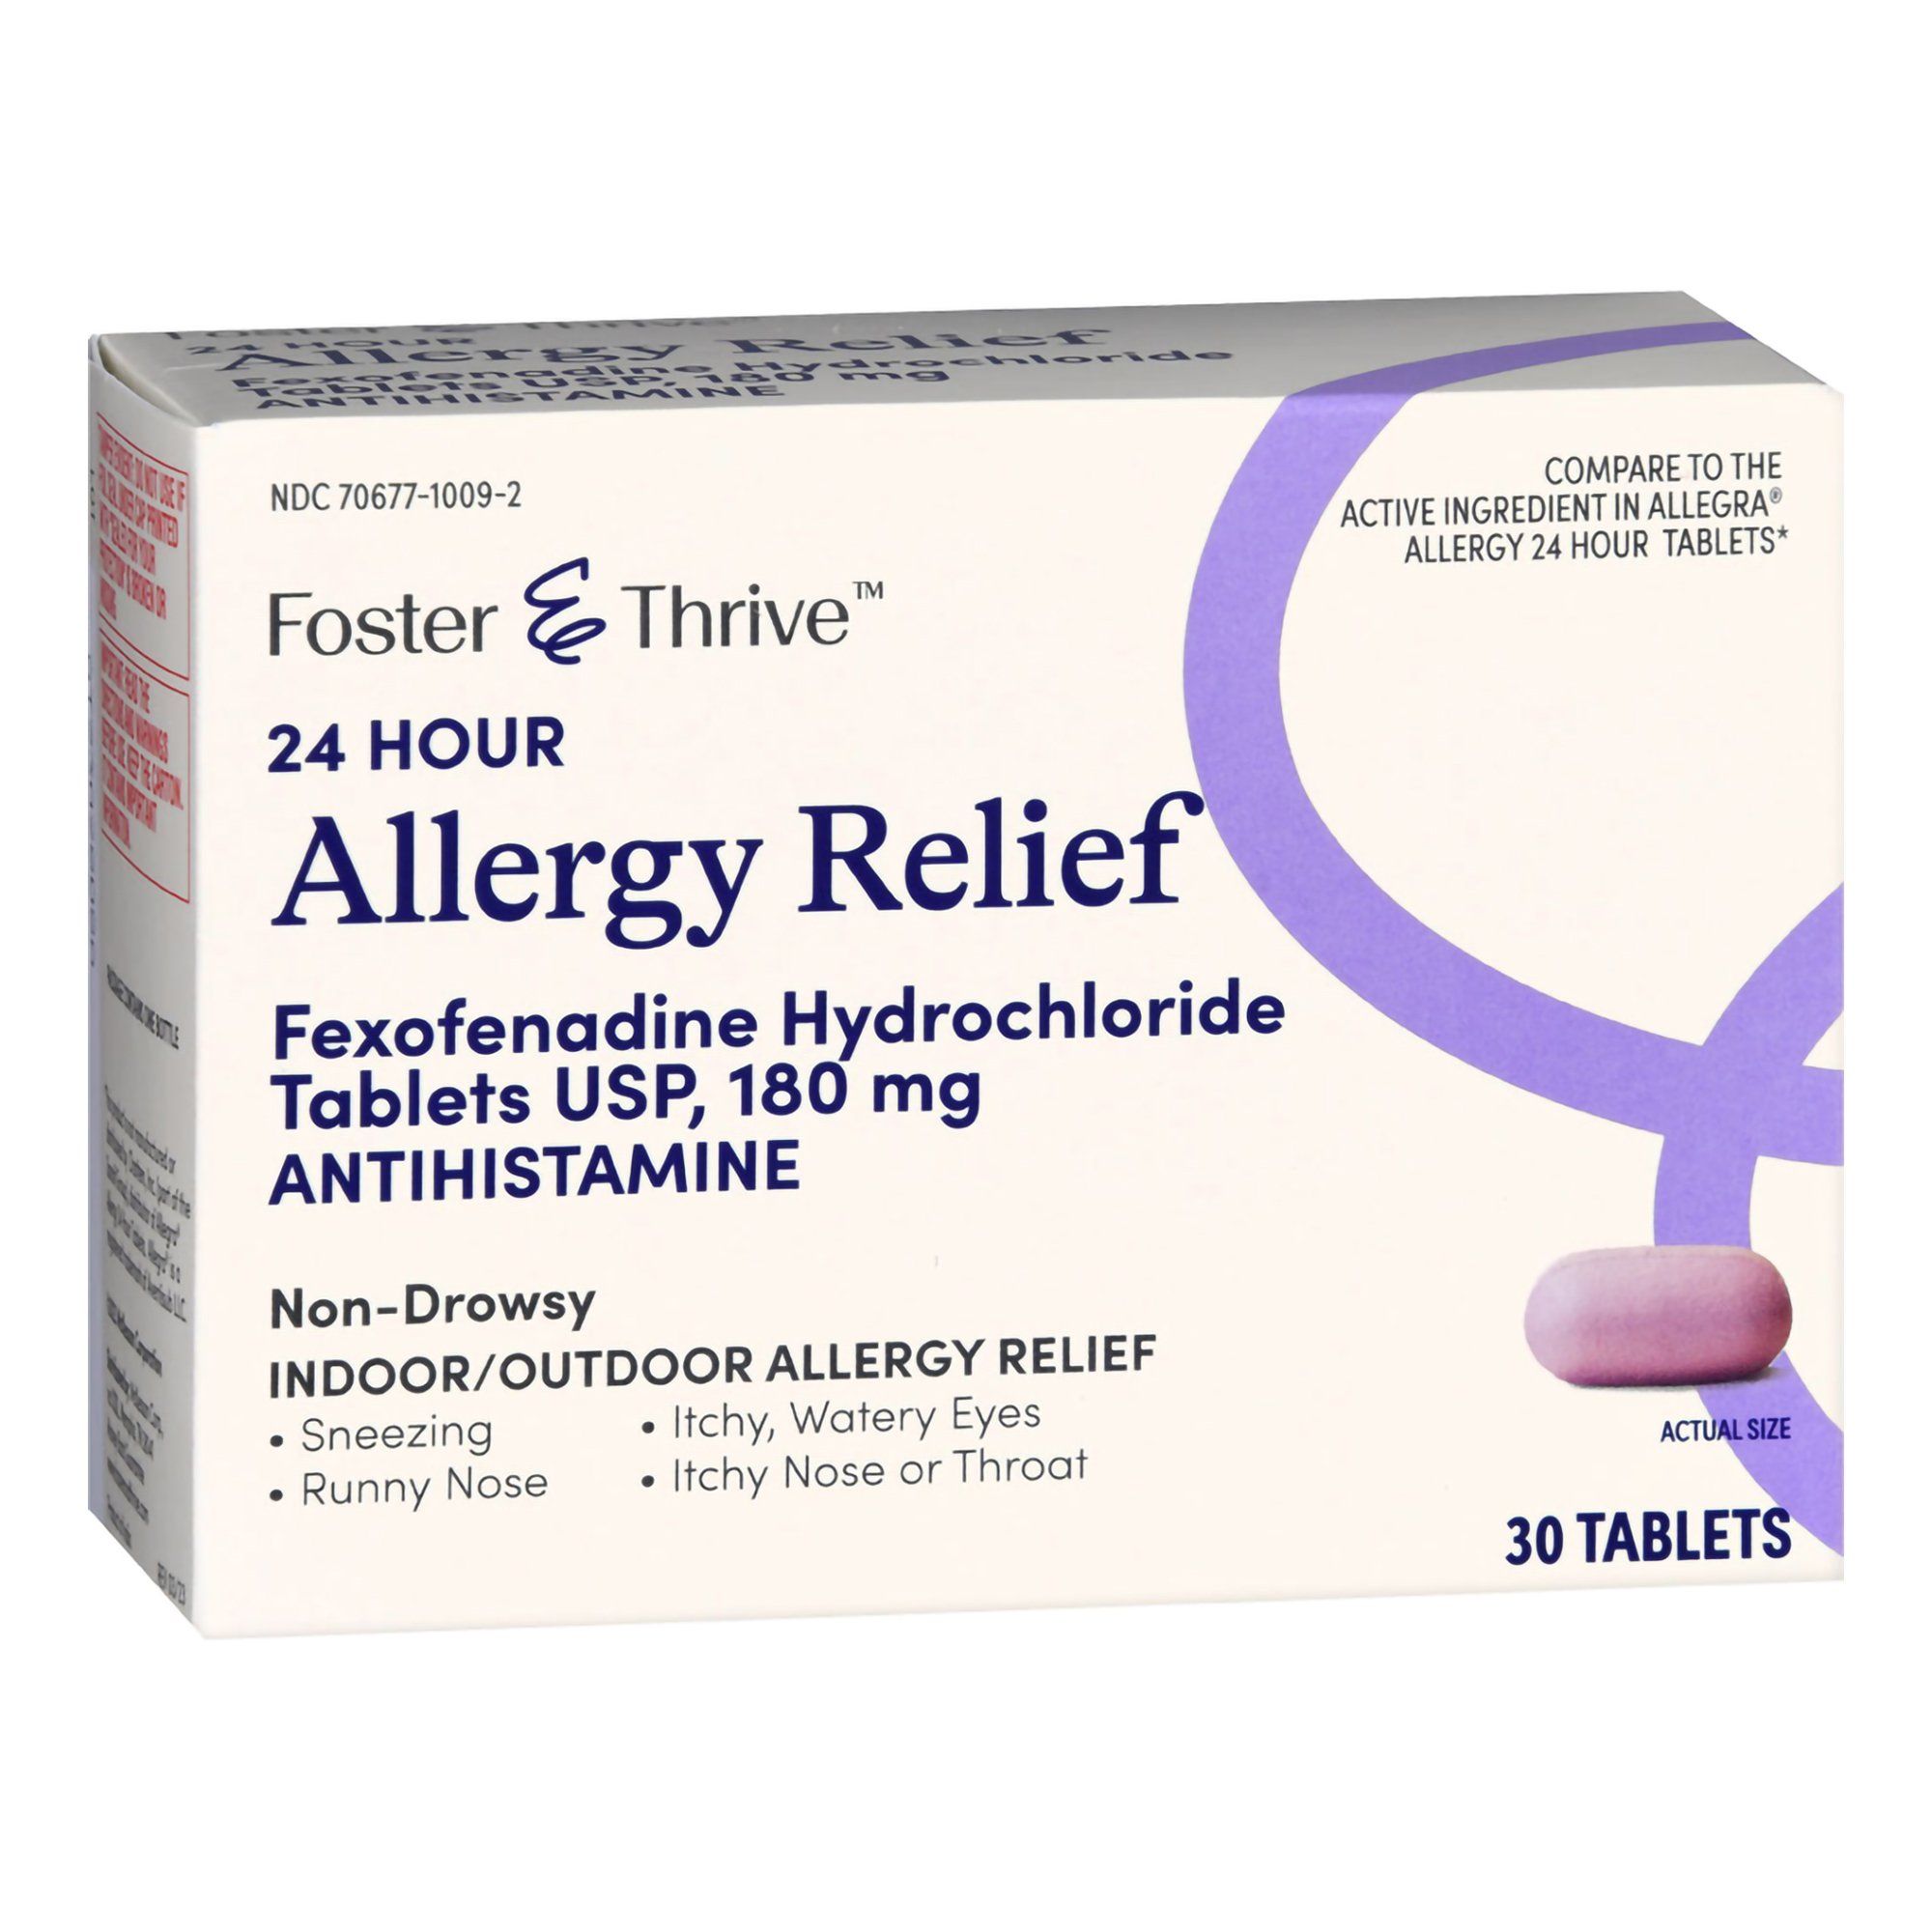 Foster & Thrive 24 Hour Allergy Relief Fexofenadine HCl USP Tablets, 180 mg - 30 ct